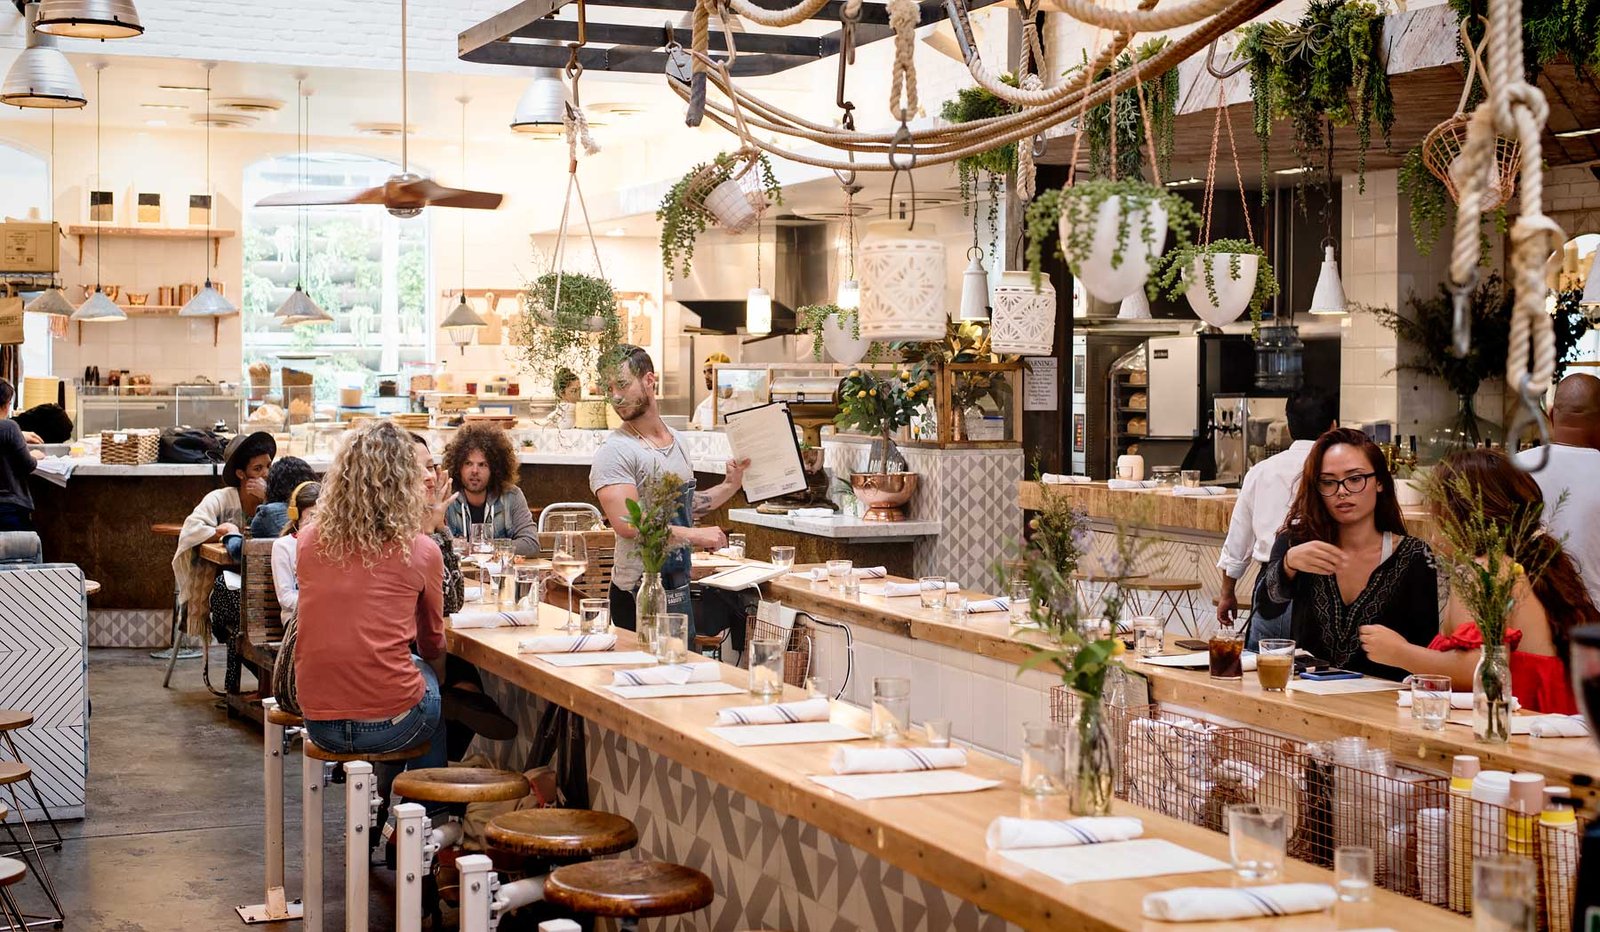 9 amazing & yummy places to eat healthy in LA